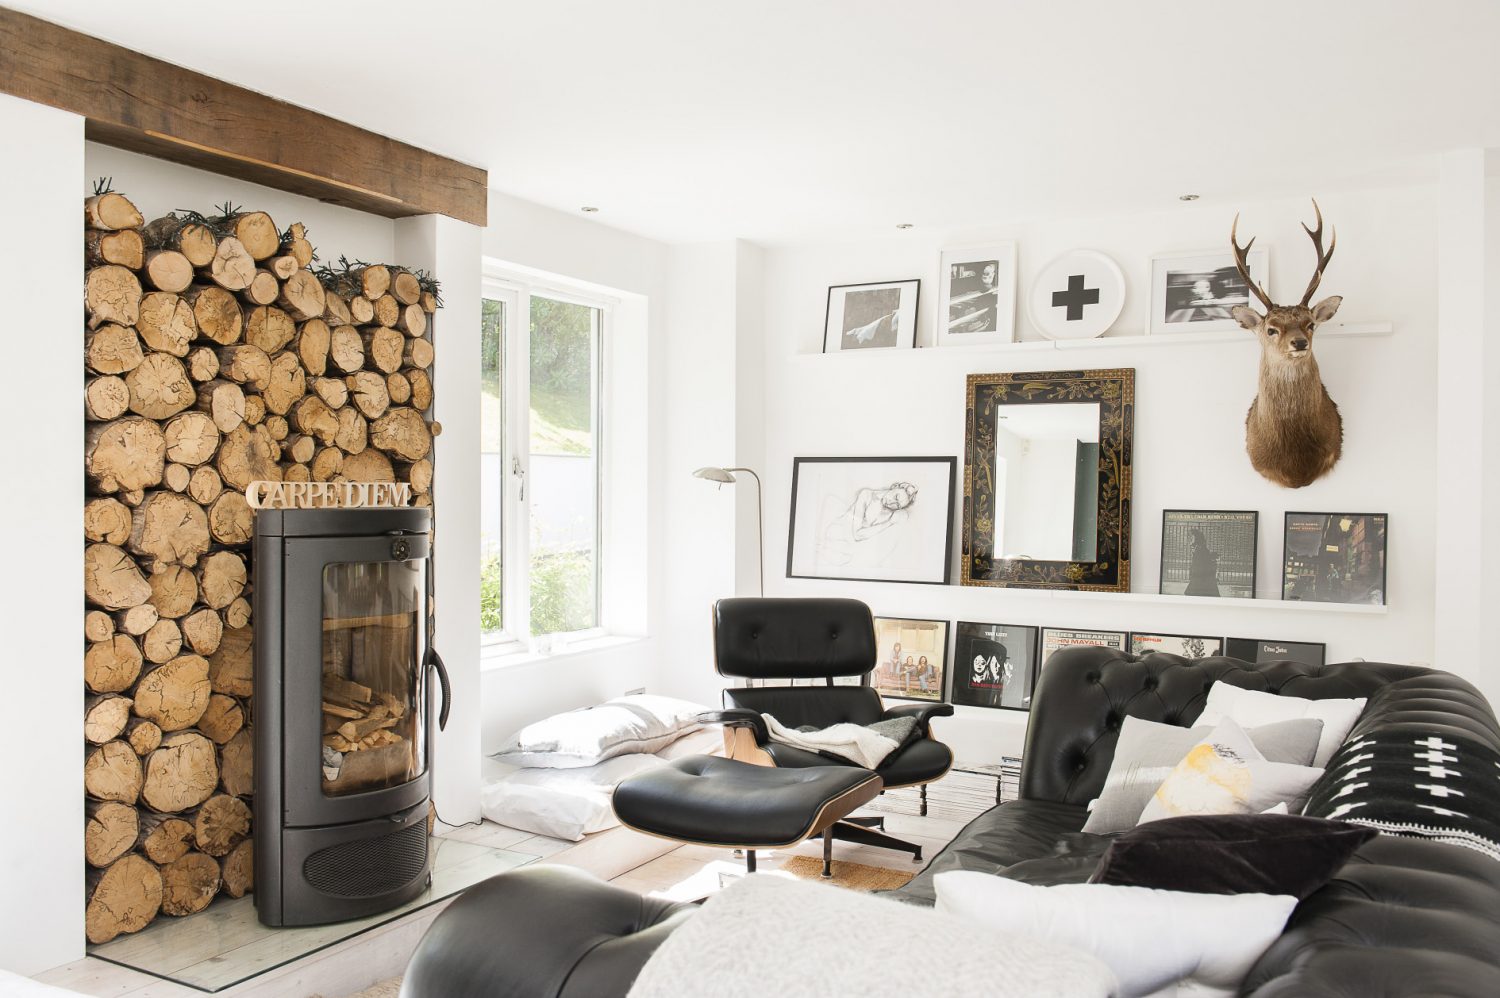 Centrepiece of the snug is an elegant contemporary Austroflamm woodburner backed by a bank of logs. Keeping it company are a Conran four-seater black leather Chesterfield and an Eames recliner. On the wall among the couple’s framed classic vinyls is one of Sue’s own charcoals.